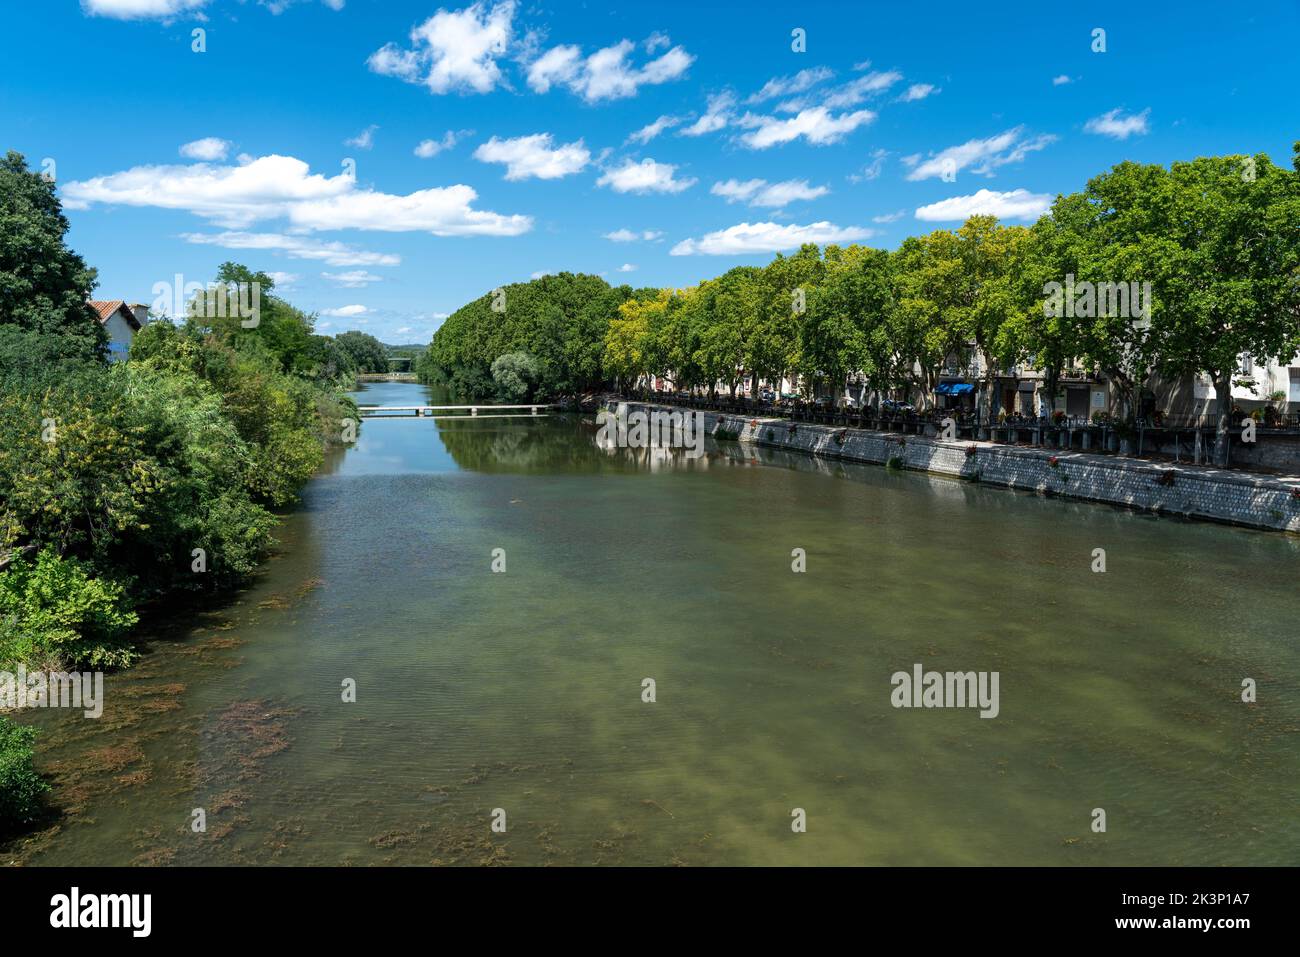 A beautiful view of a river surrounded by trees on a sunny day in Sommieres, Gard, France Stock Photo